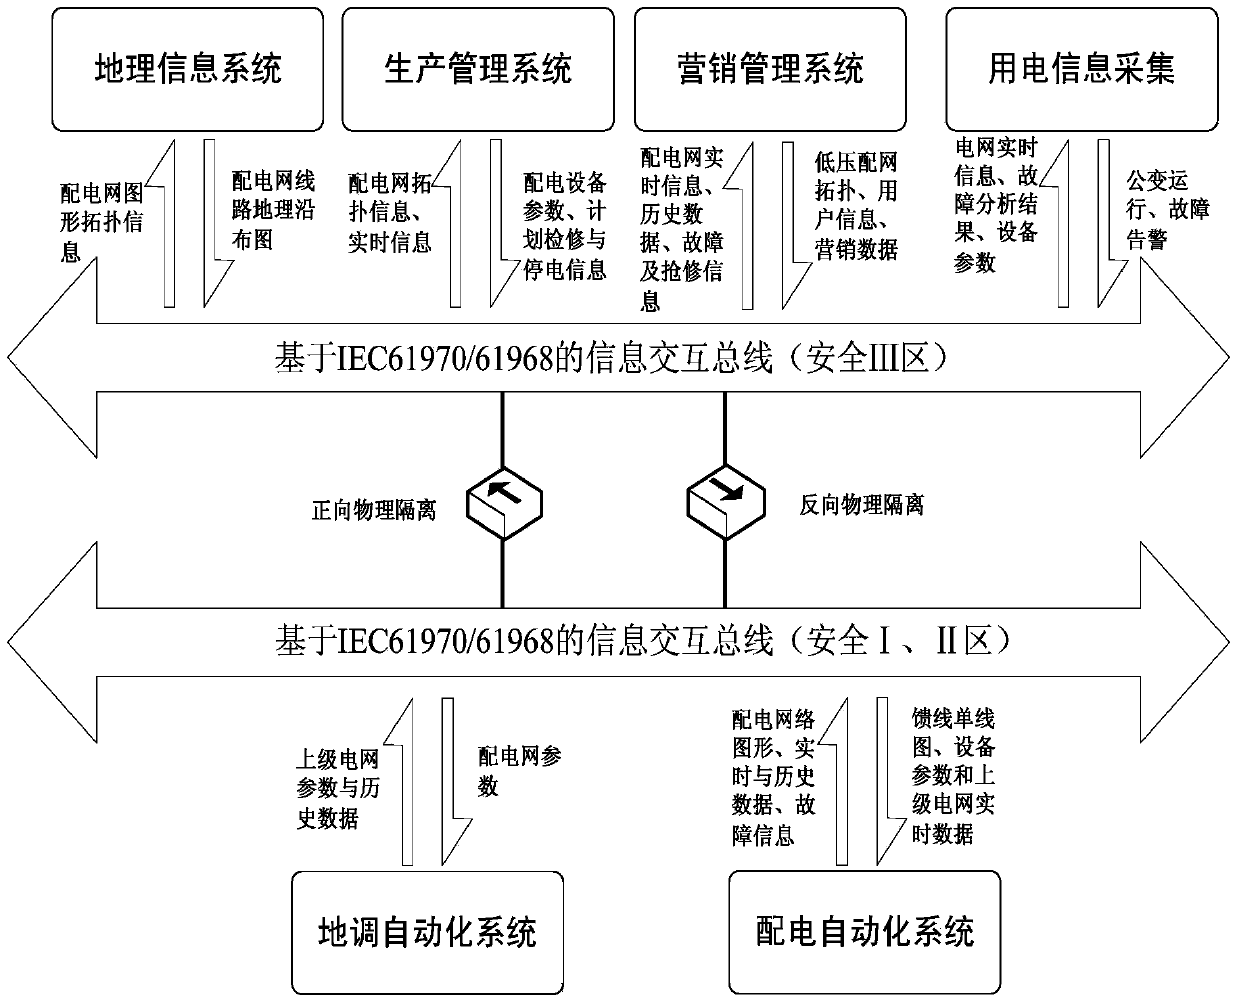 Distribution automation system configuration method based on city and county level integration